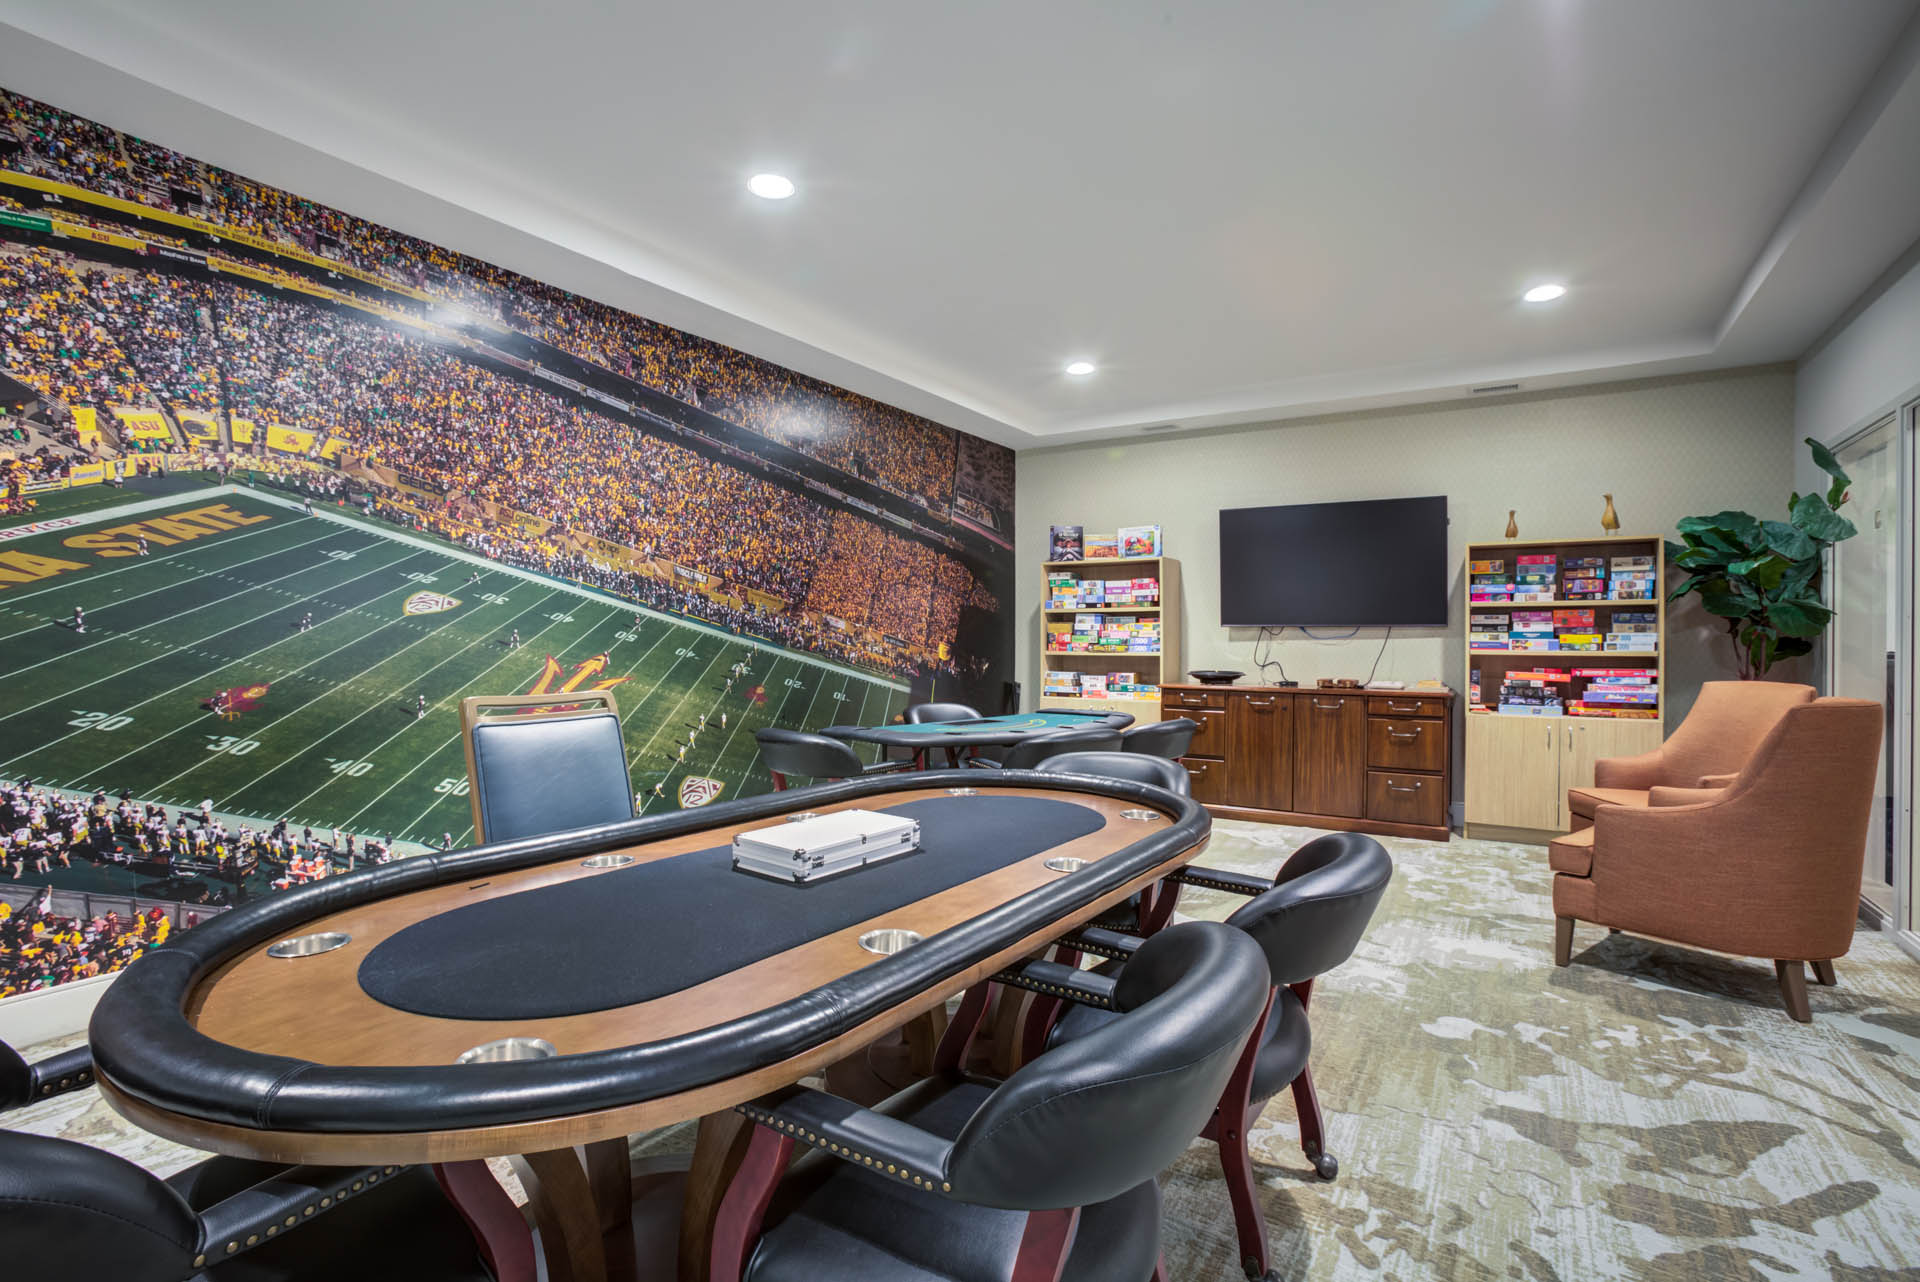 Game room with poker table and seating area.